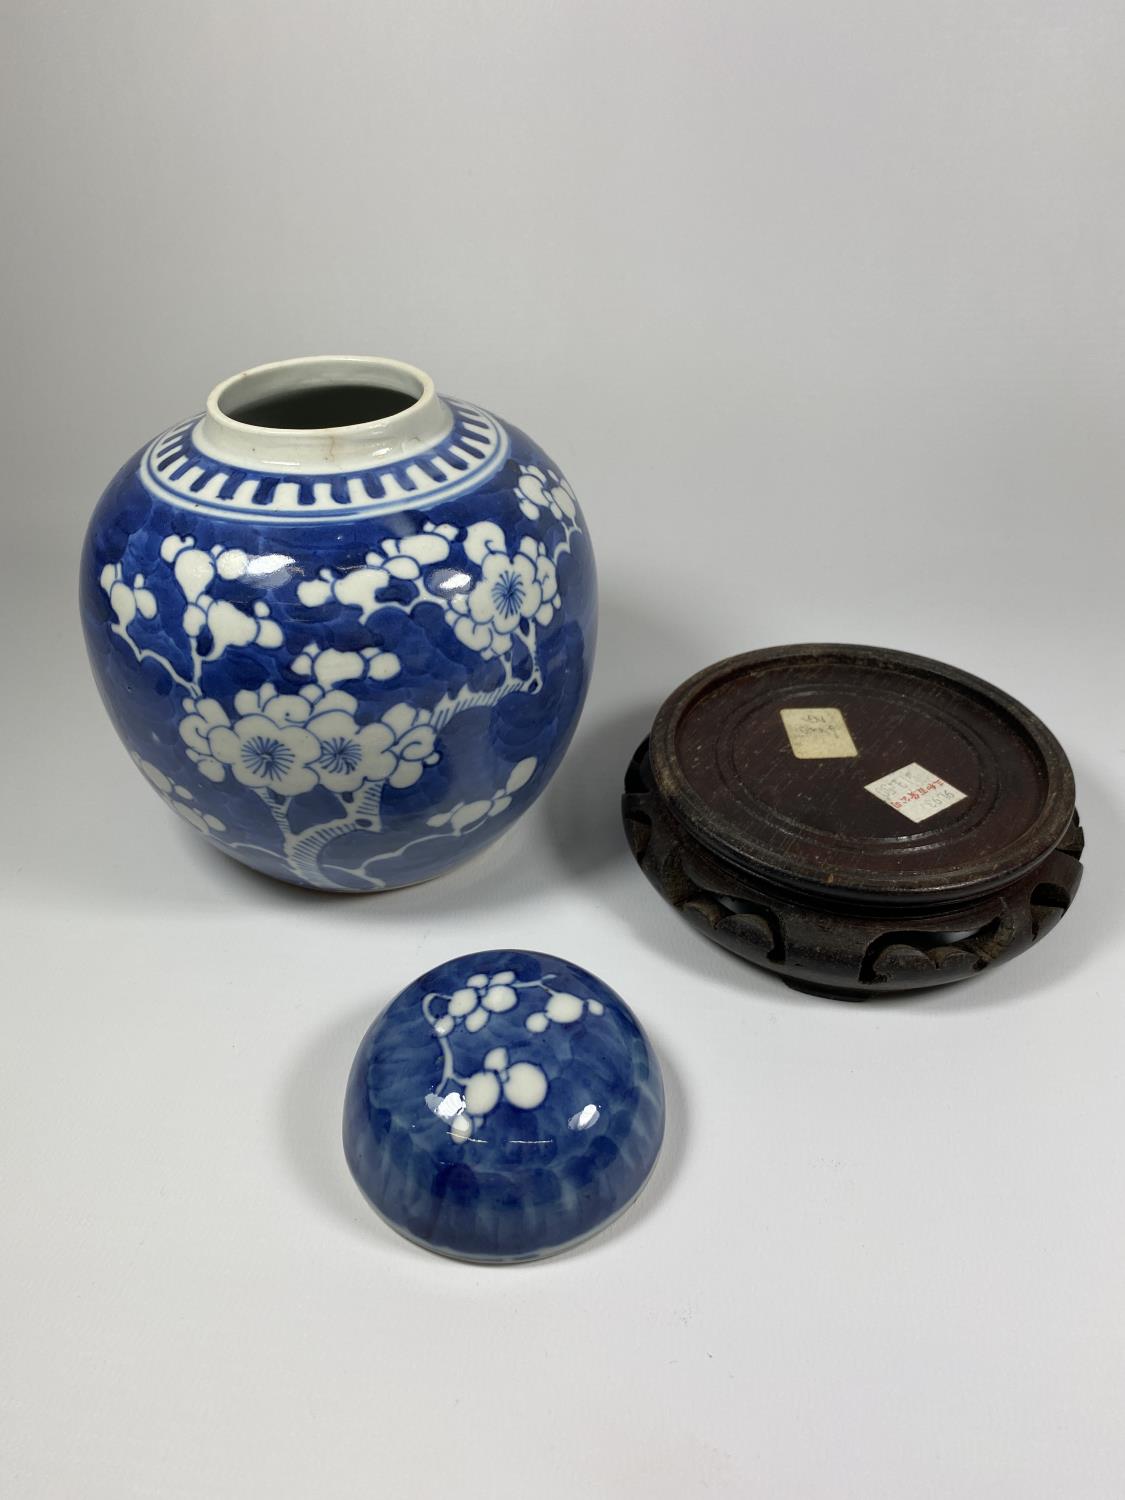 A LATE 19TH CENTURY CHINESE PORCELAIN PRUNUS BLOSSOM PATTERN GINGER JAR ON WOODEN BASE, DOUBLE - Image 2 of 7